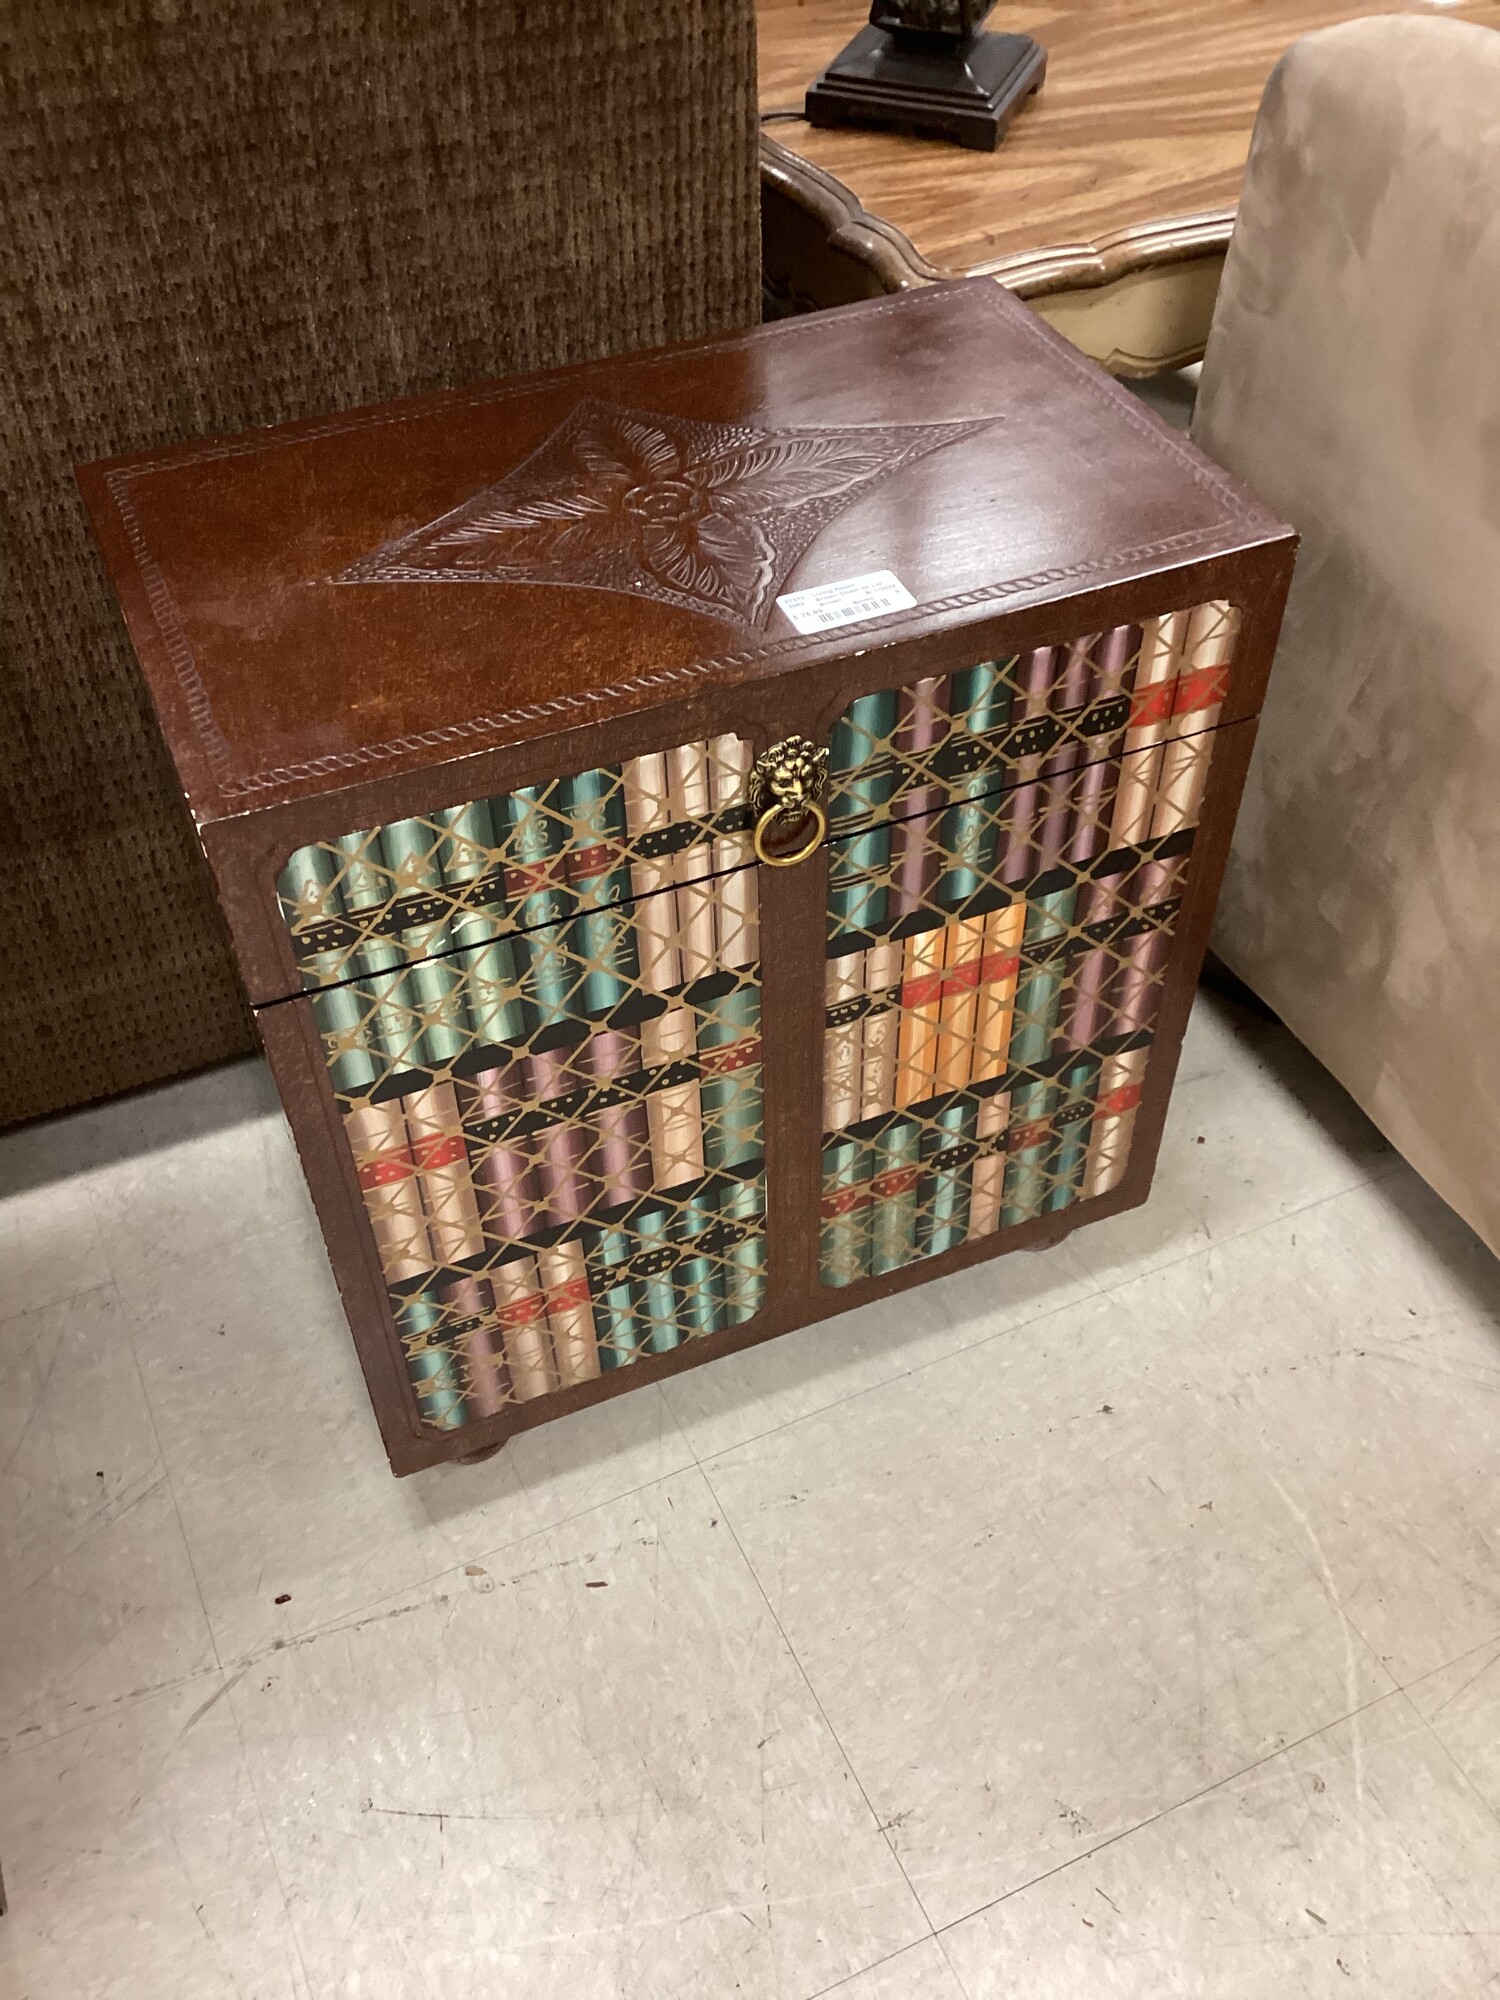 Brown Chest W/ Lid, Brown, Books
20.5 in Wide x 12 in Deep x 22 in Tall